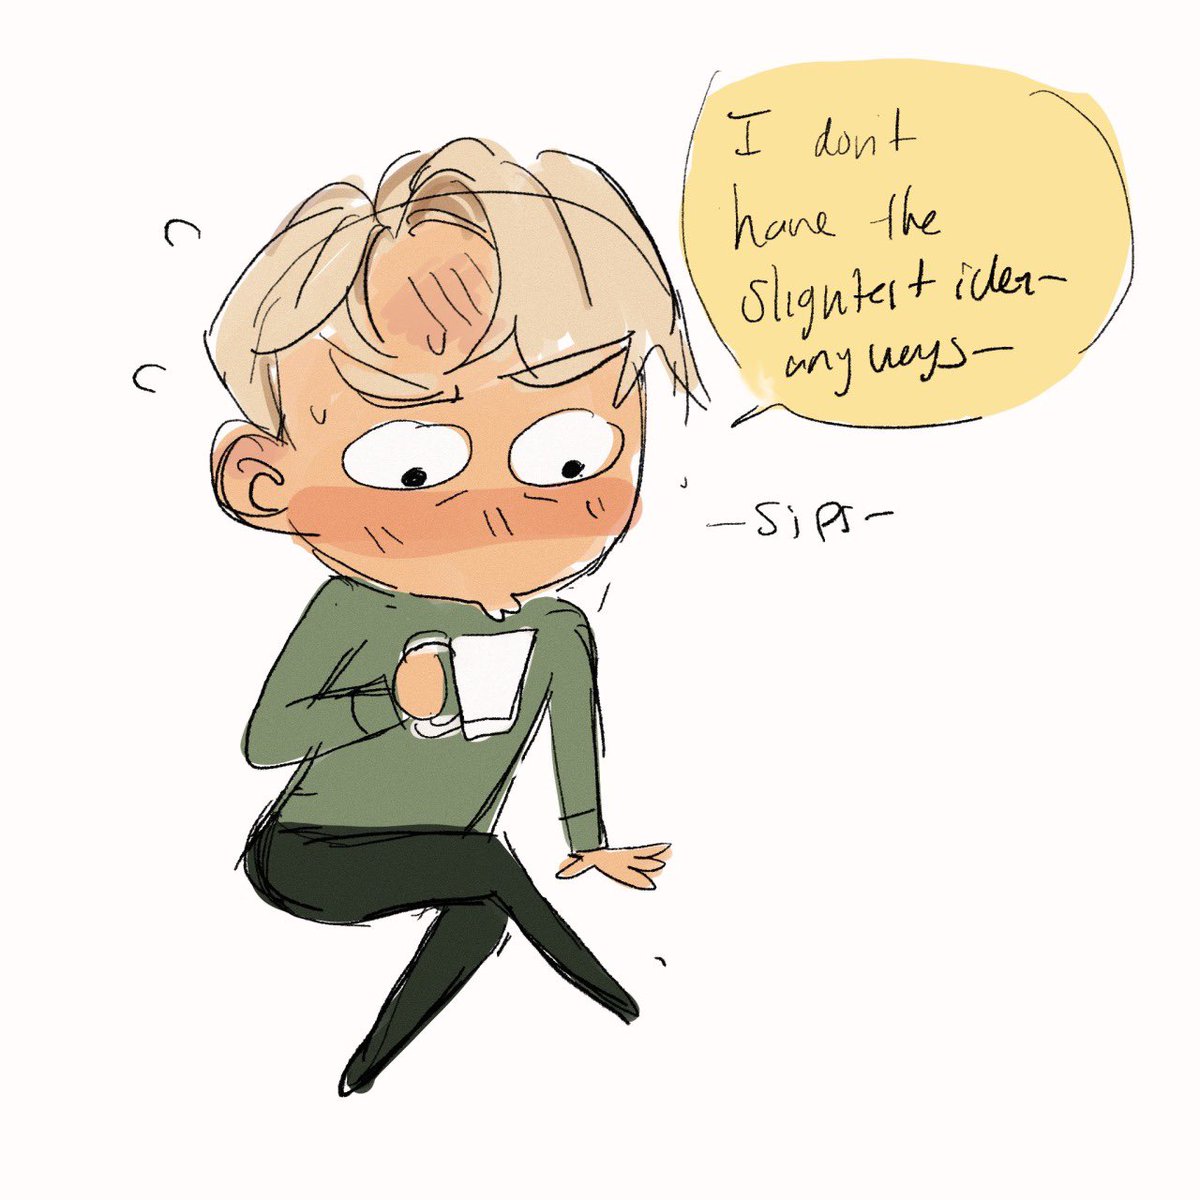 A little funny panel of draco being nervous